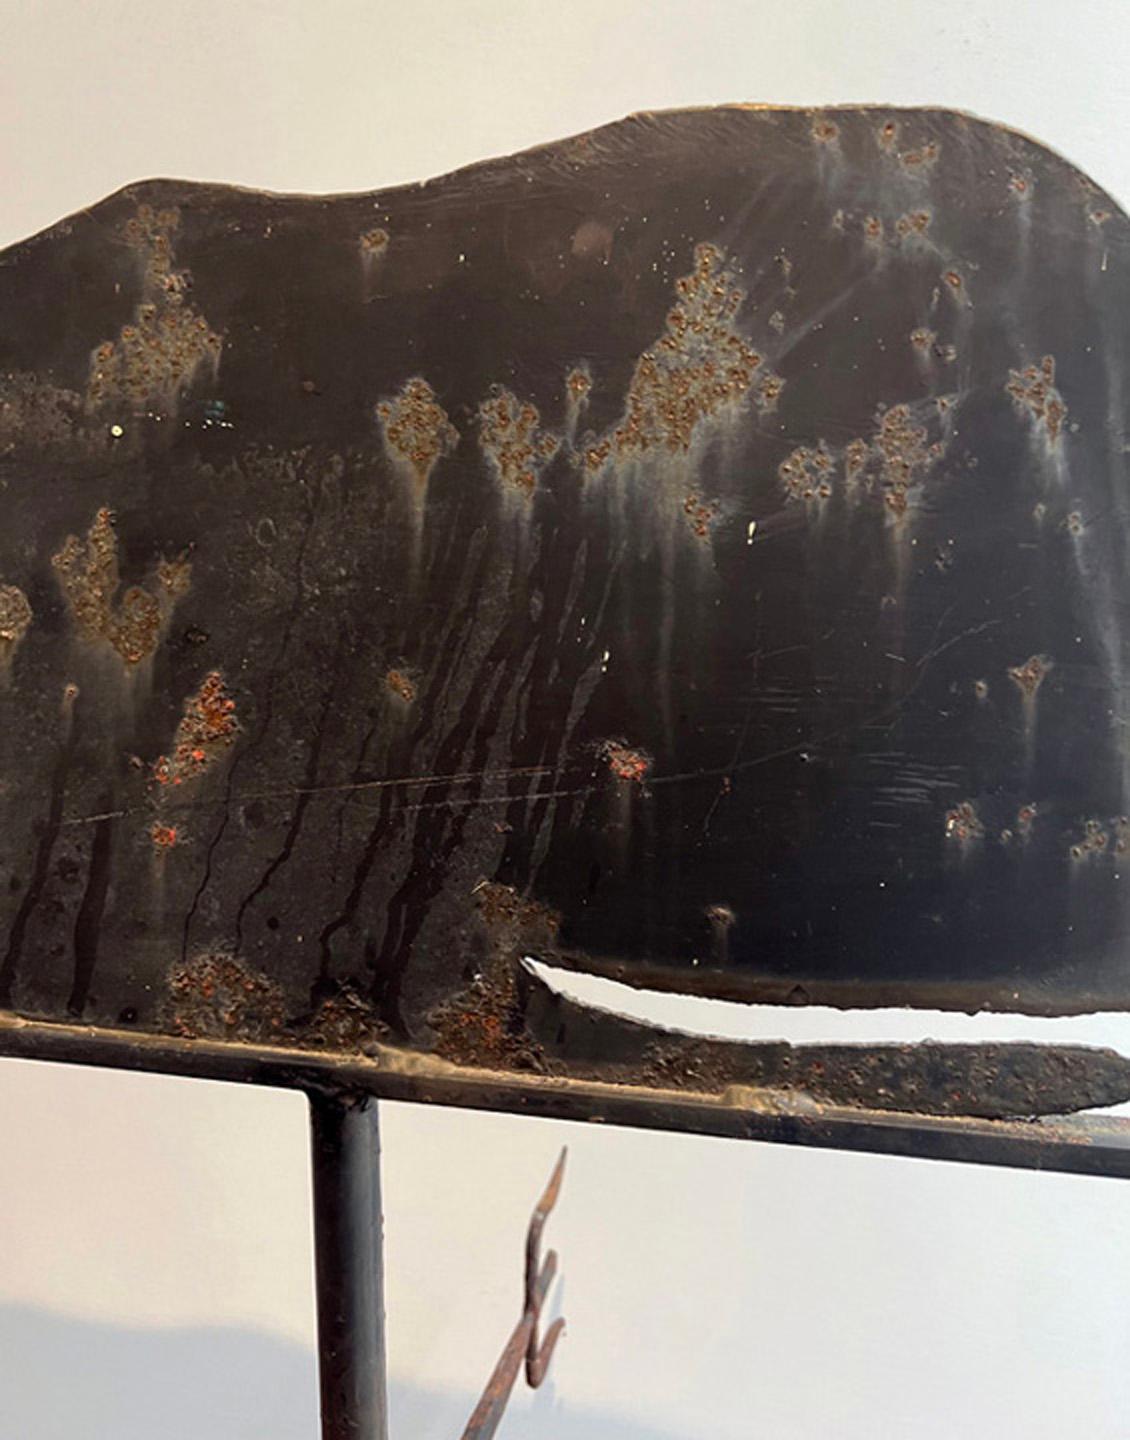 This is and example of an early American Antique weather vane Sperm whale. Hand made by a skilled black smith the details are amazing. The directions are accented by sharp pointed iron work. It has an amazing twist to the tail that wake it a really